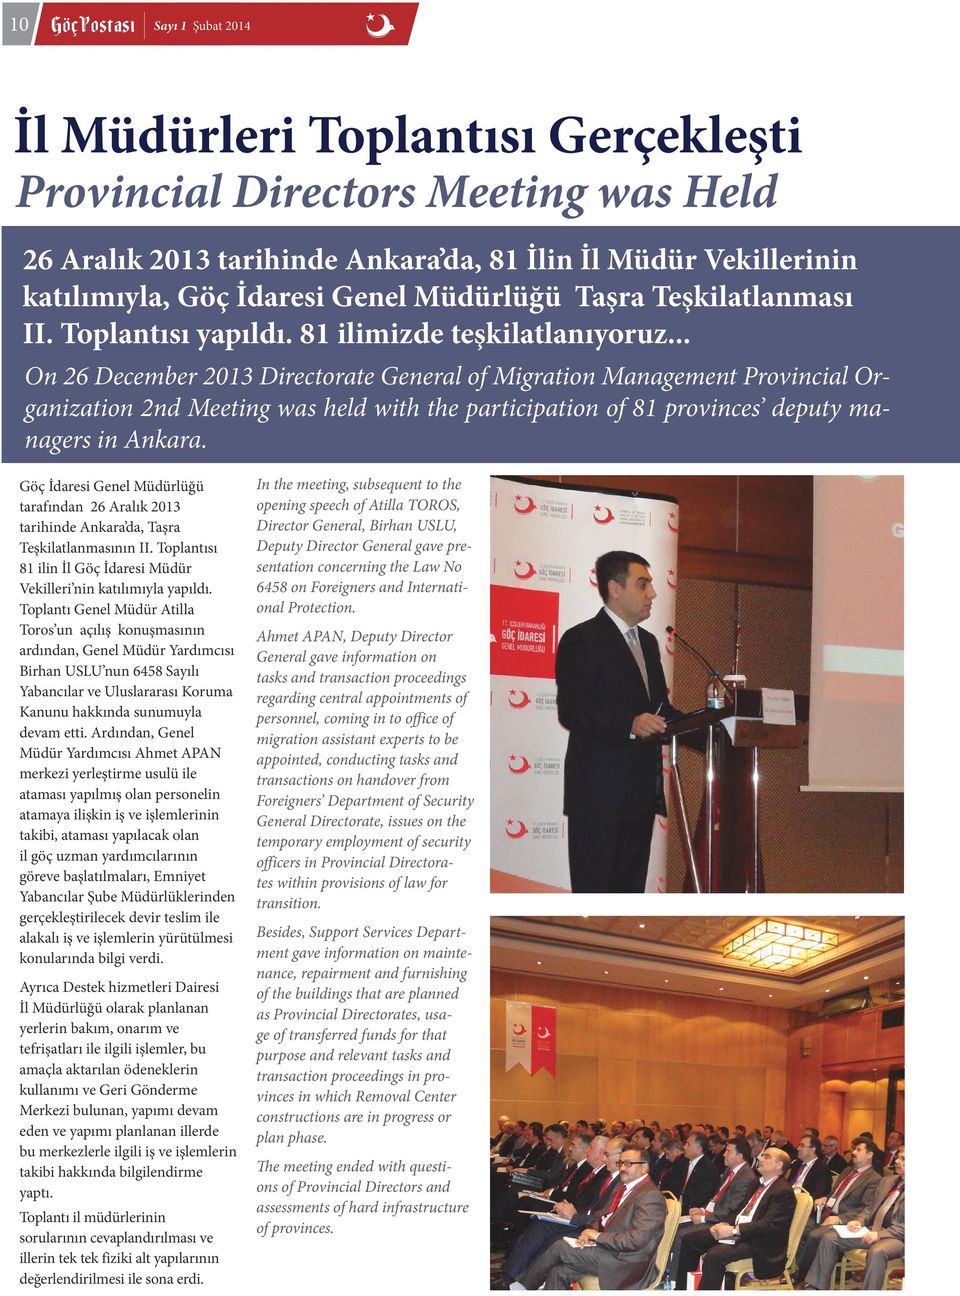 .. On 26 December 2013 Directorate General of Migration Management Provincial Organization 2nd Meeting was held with the participation of 81 provinces deputy managers in Ankara.